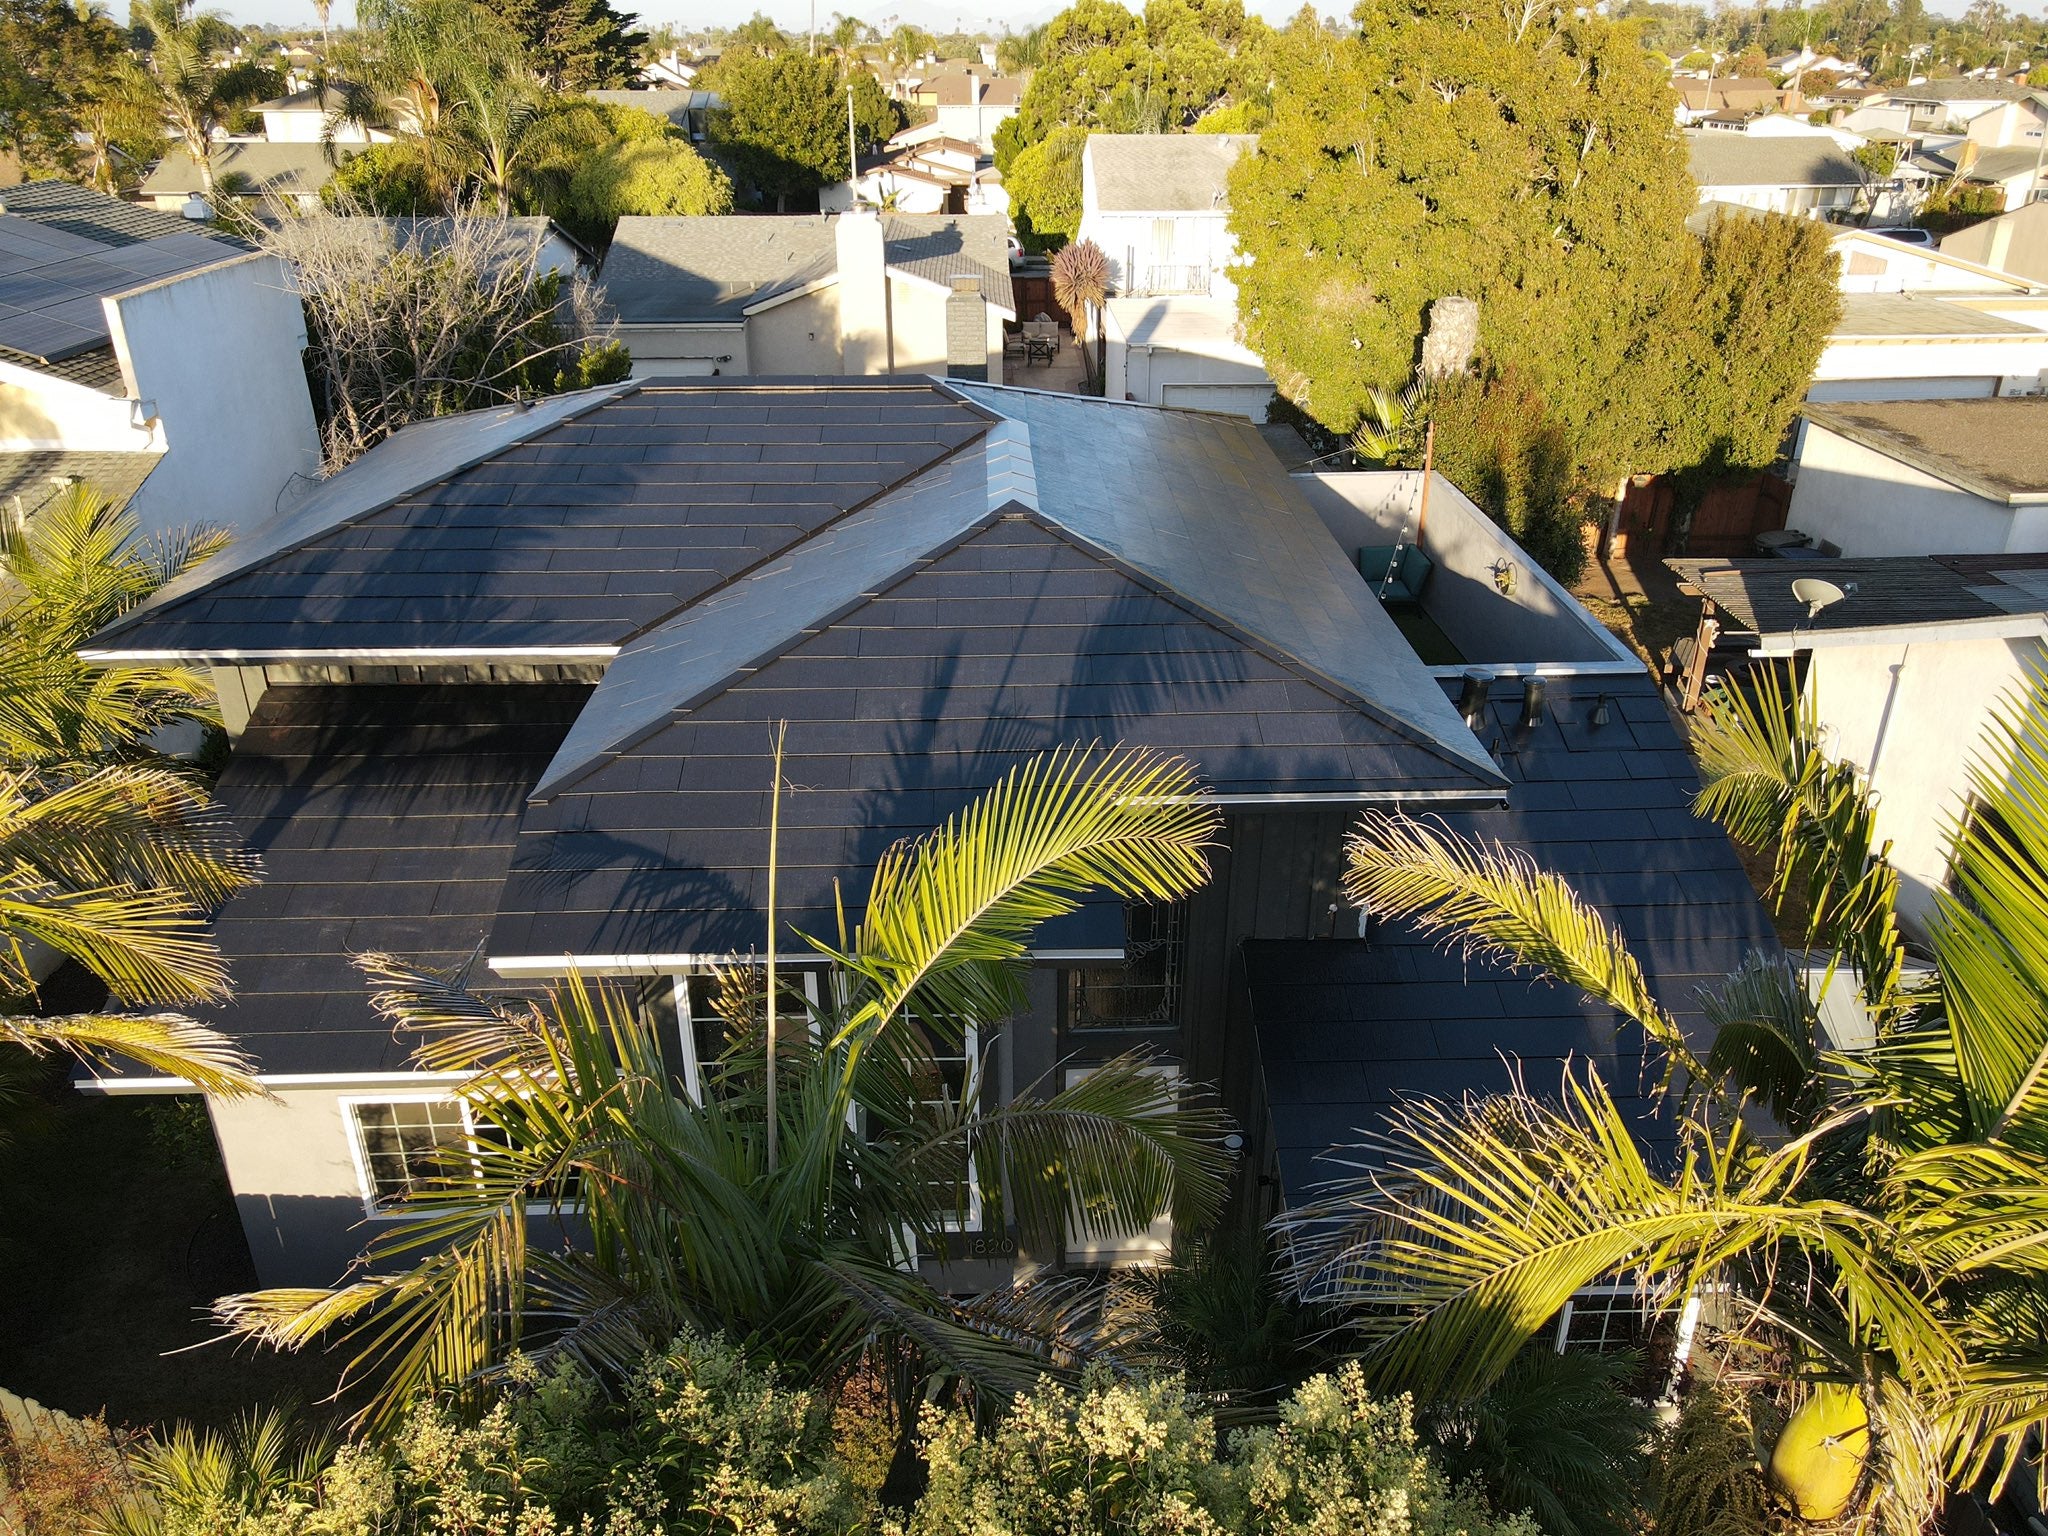 Tesla Solar Roof Owner Shares Incredible Price of Newly Installed System